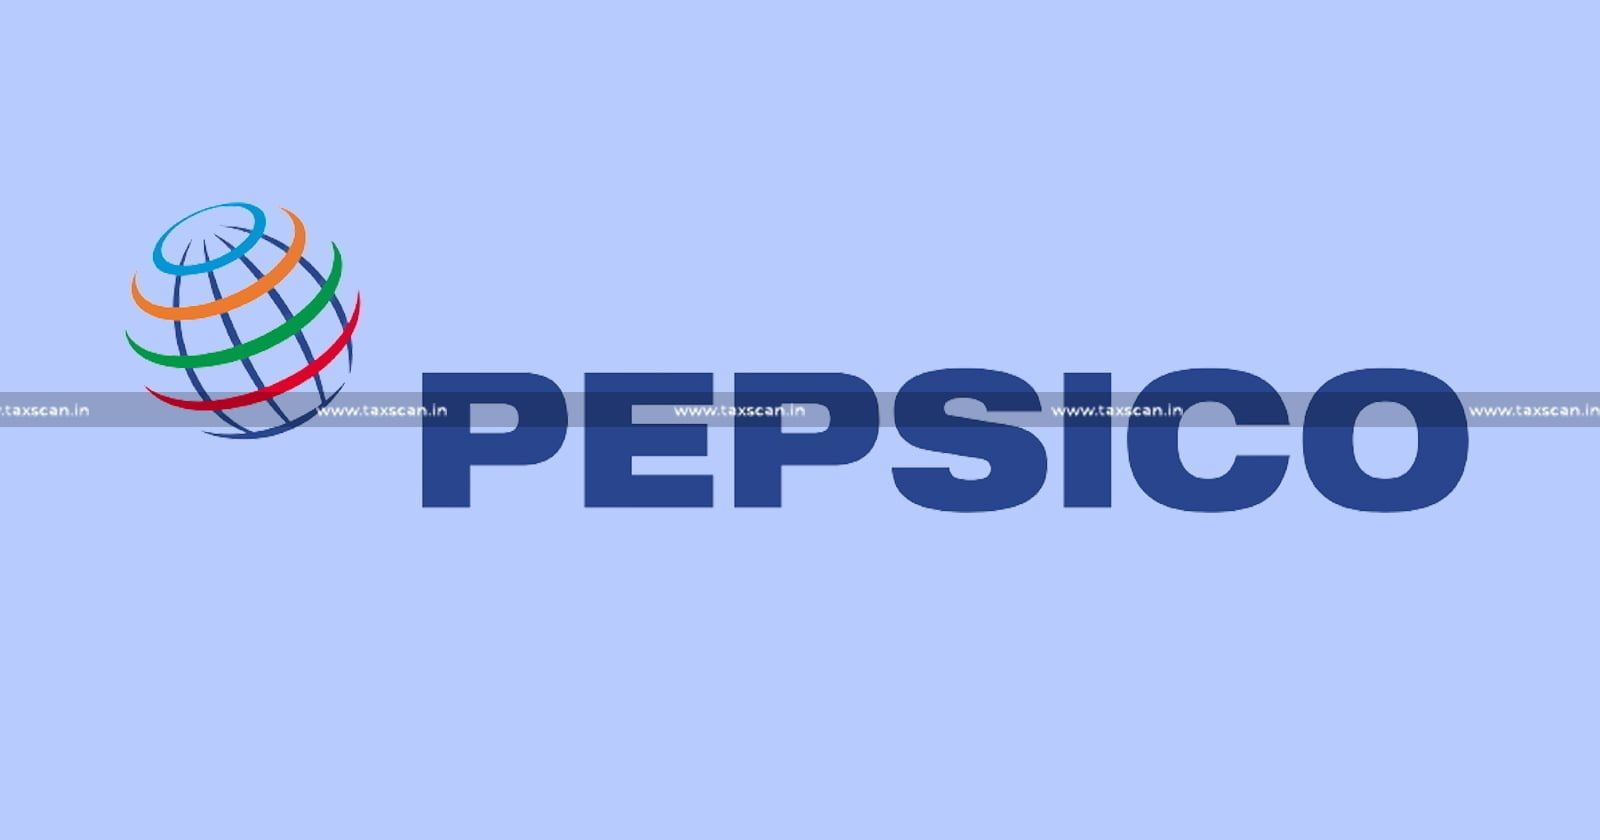 Delhi High Court - Late - Deposit - Employee - National - Holiday - allowable - Favour - PepsiCo India - taxscan